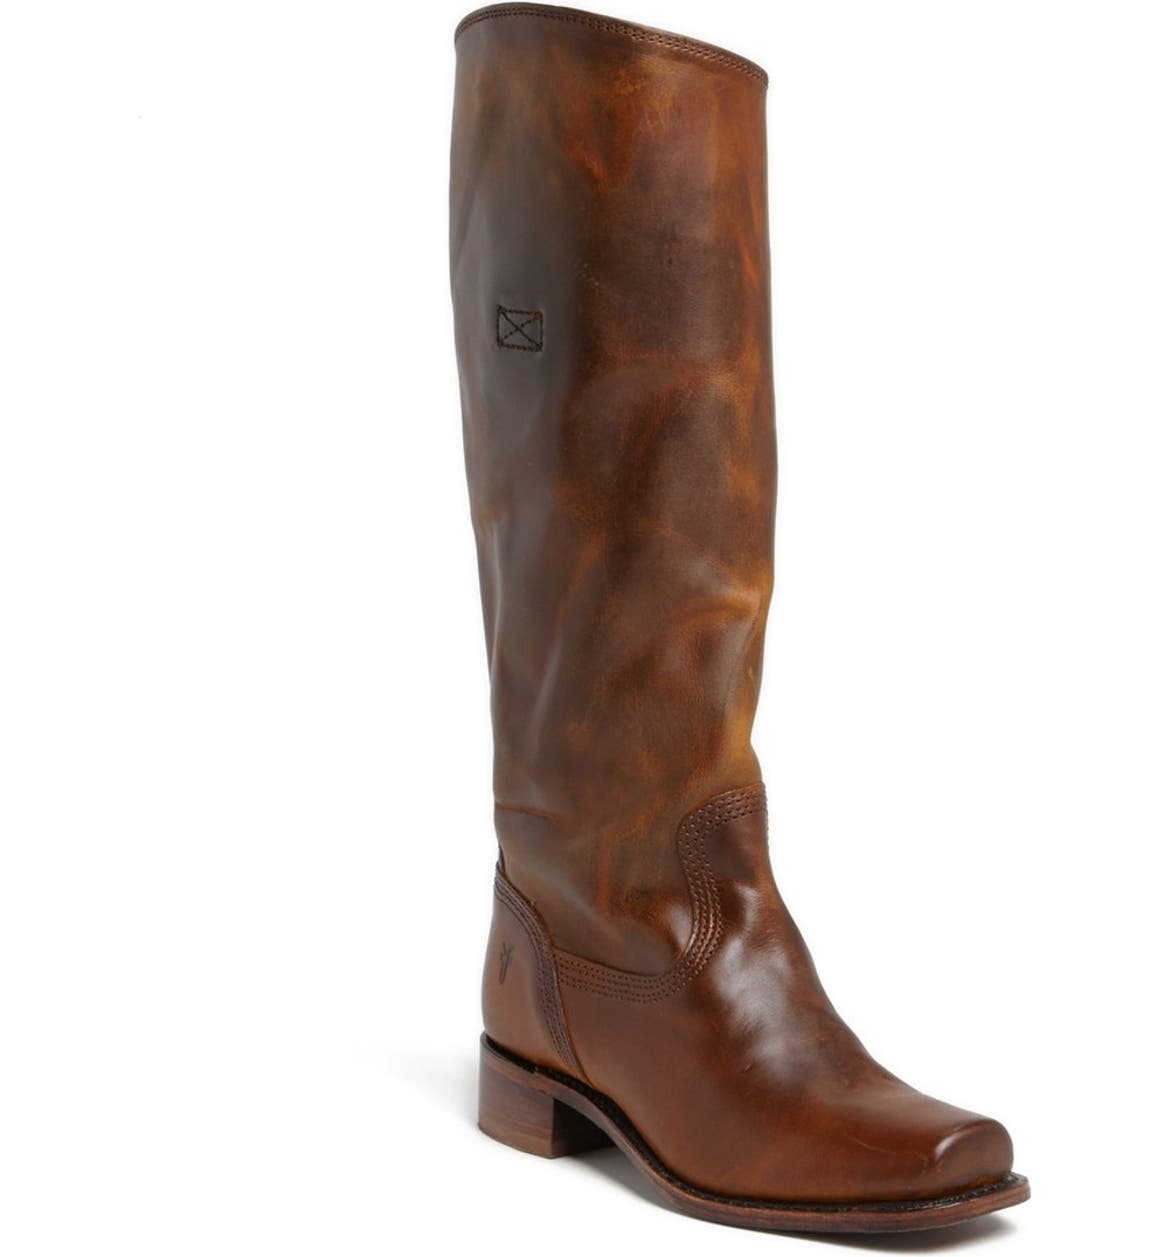 Frye Cavalry Tall Riding Boot Limited Edition Nordstrom